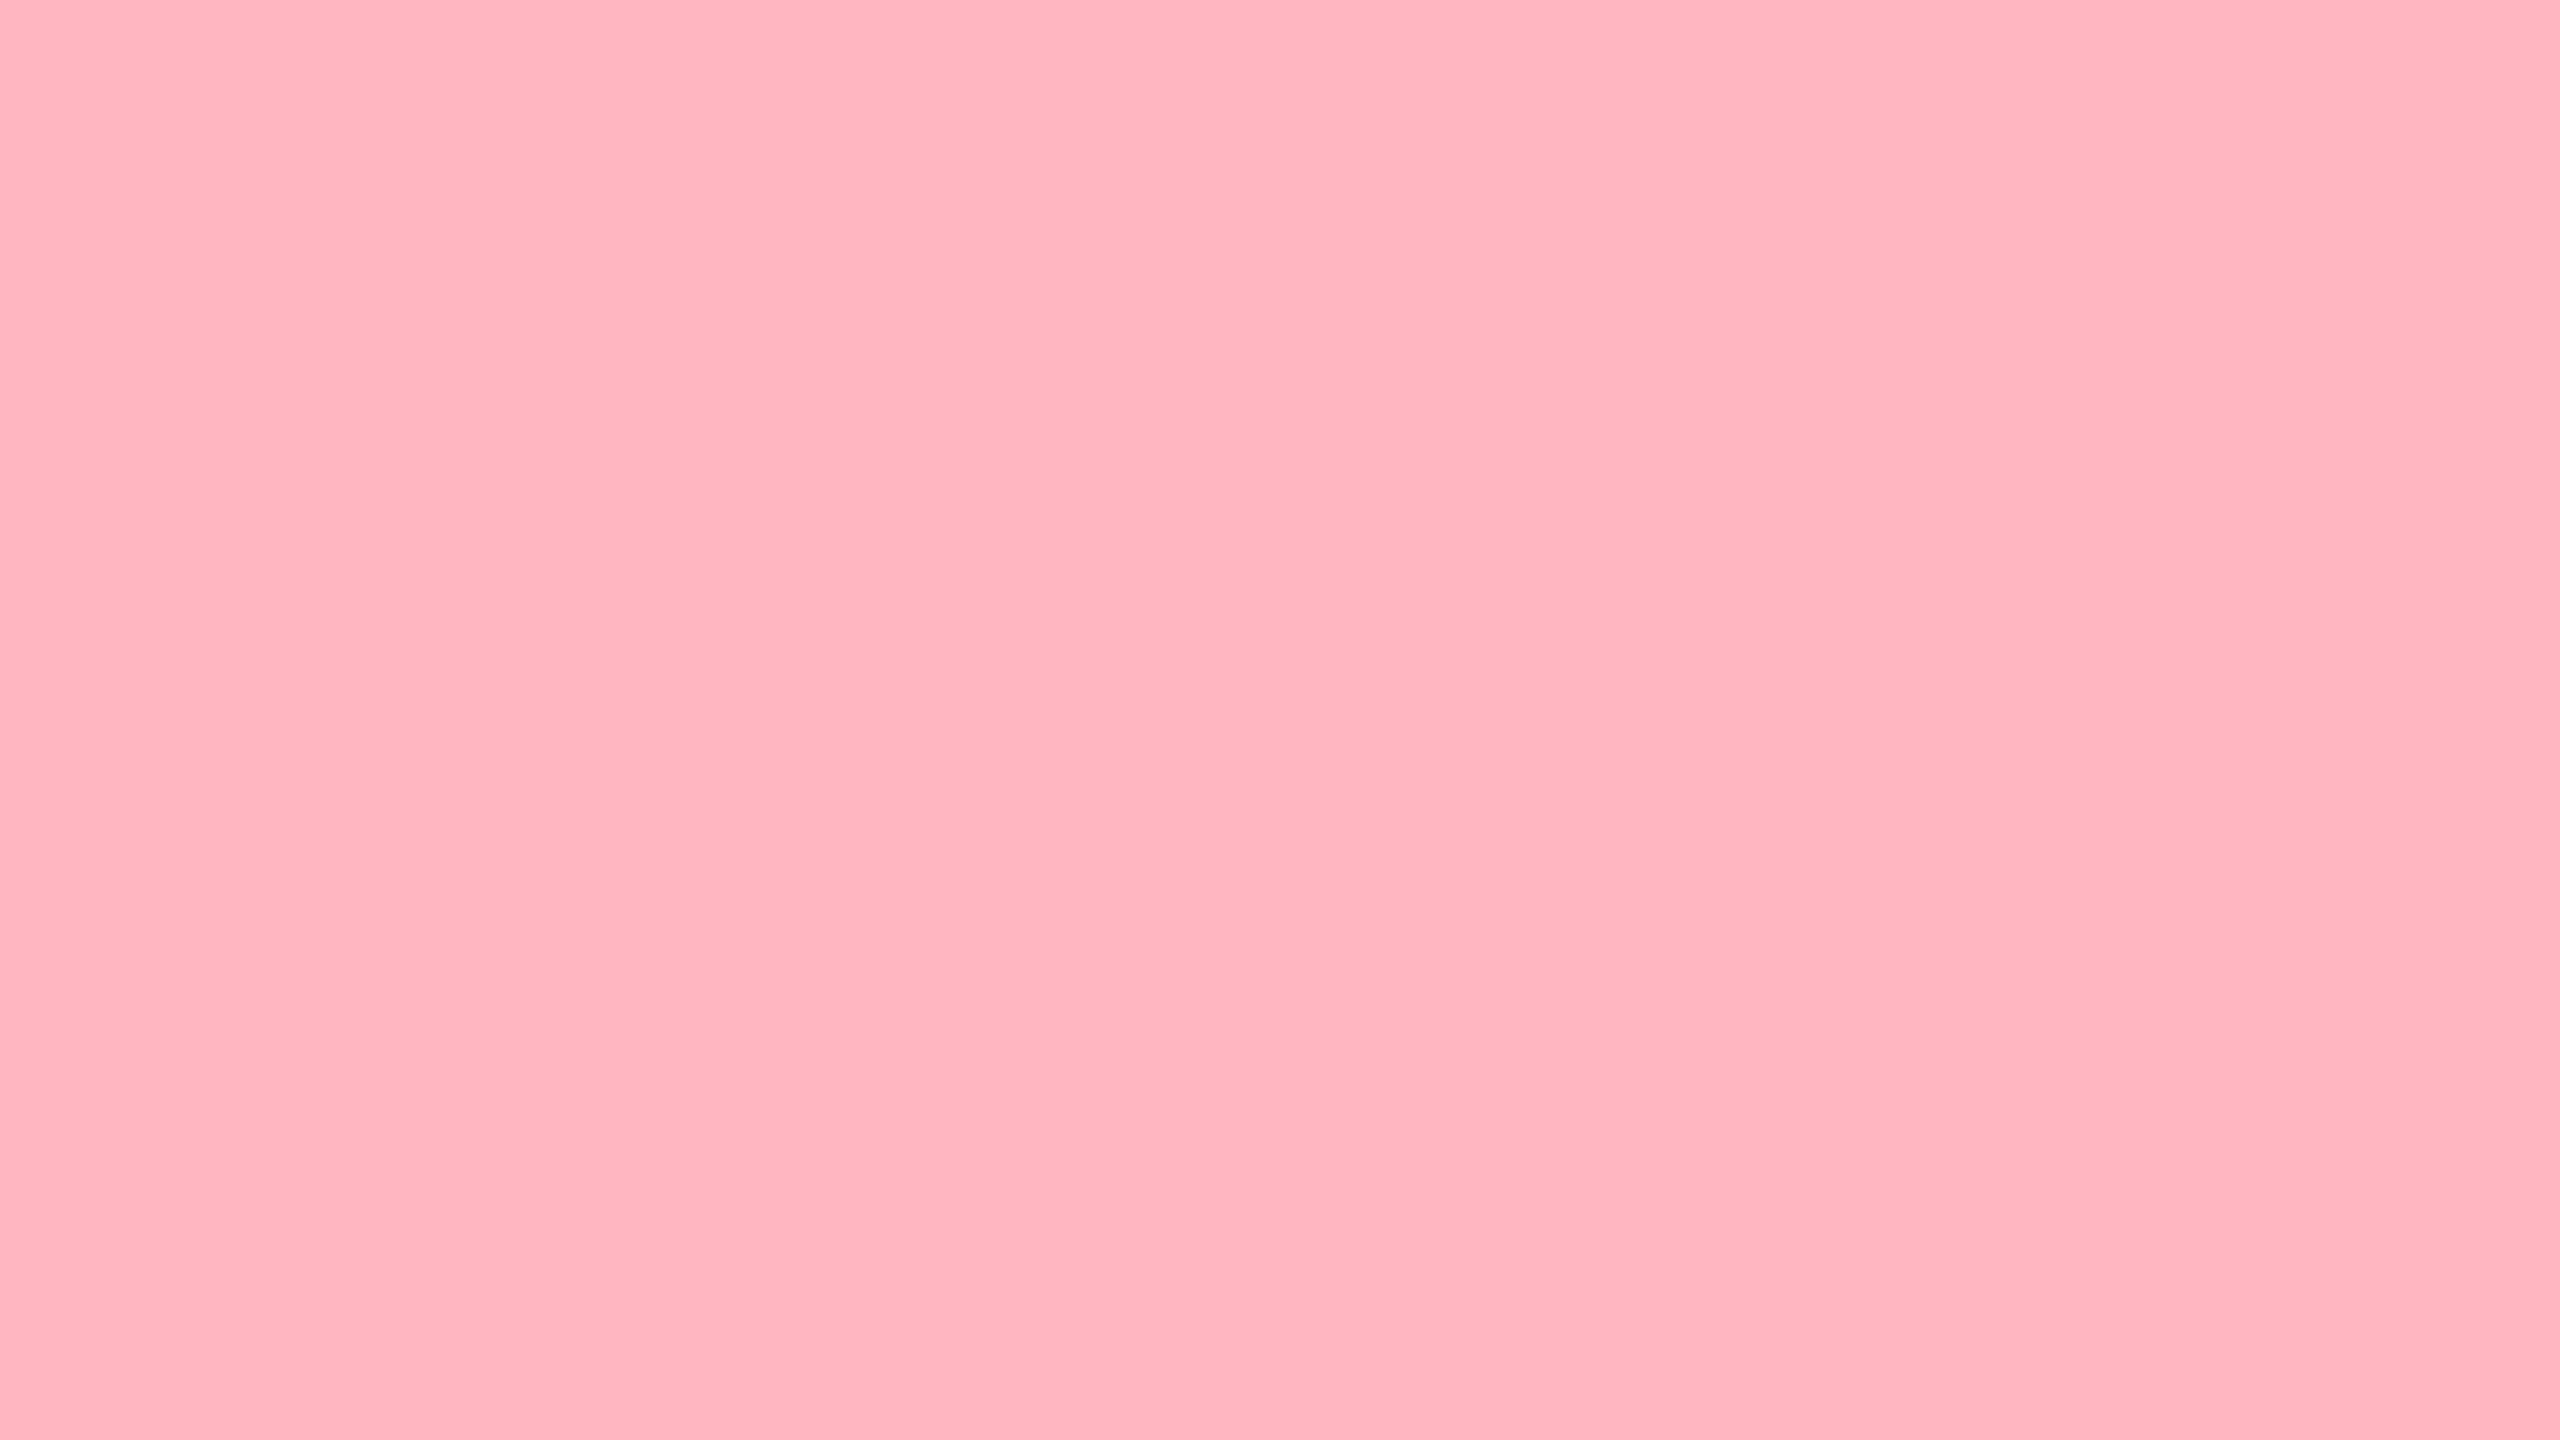 2560x1440 light pink solid color wallpaper hd wallpapers